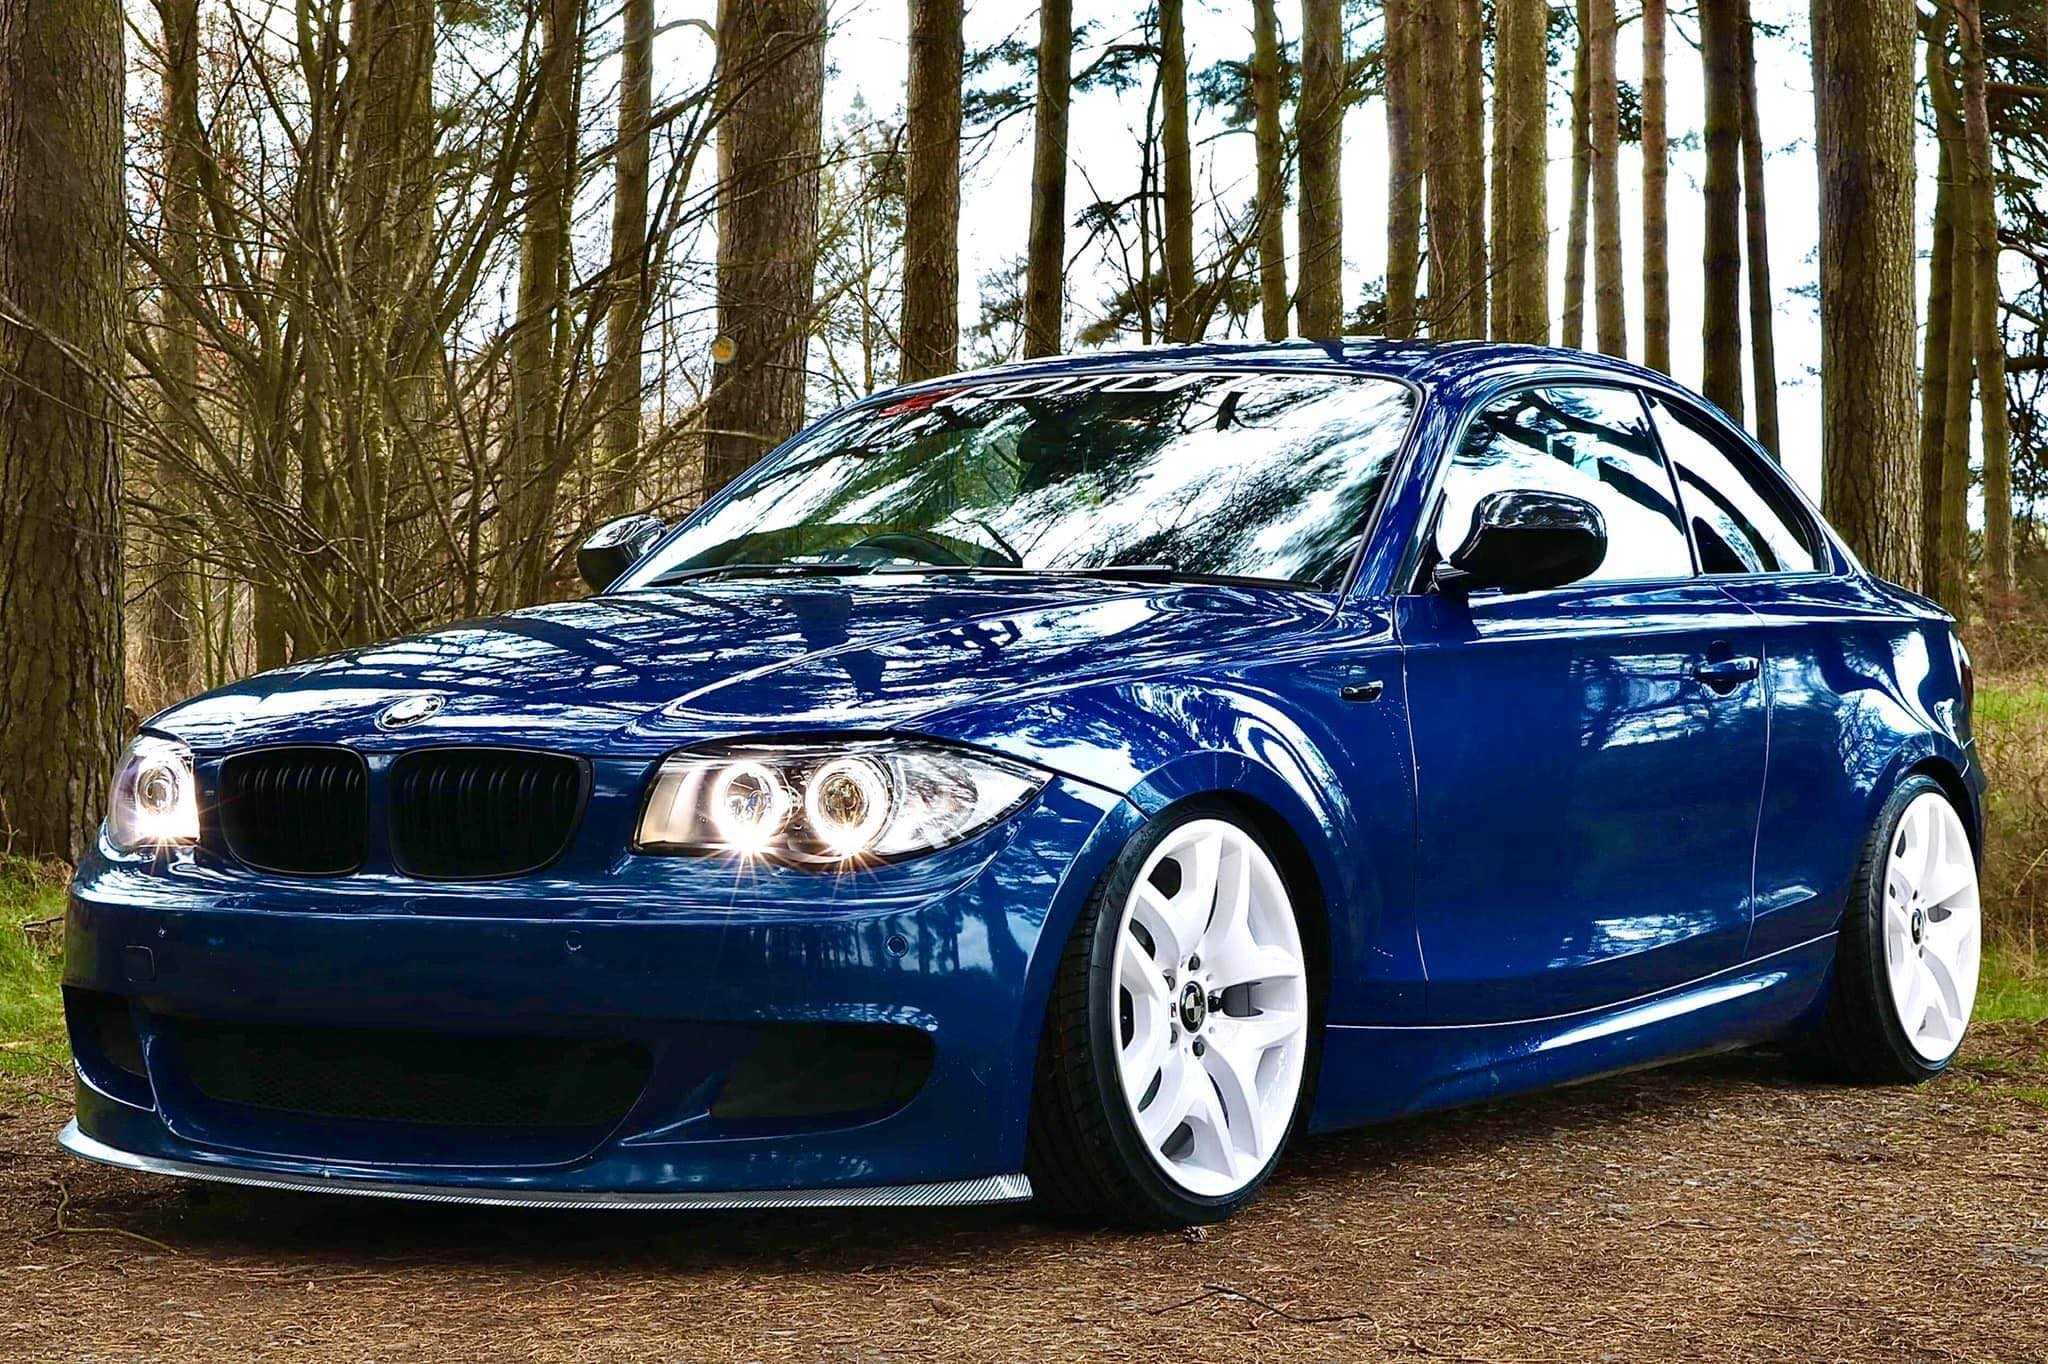 2012 Modified BMW E82 Coupe 120d Sport Plus Edition – Bounty Competitions